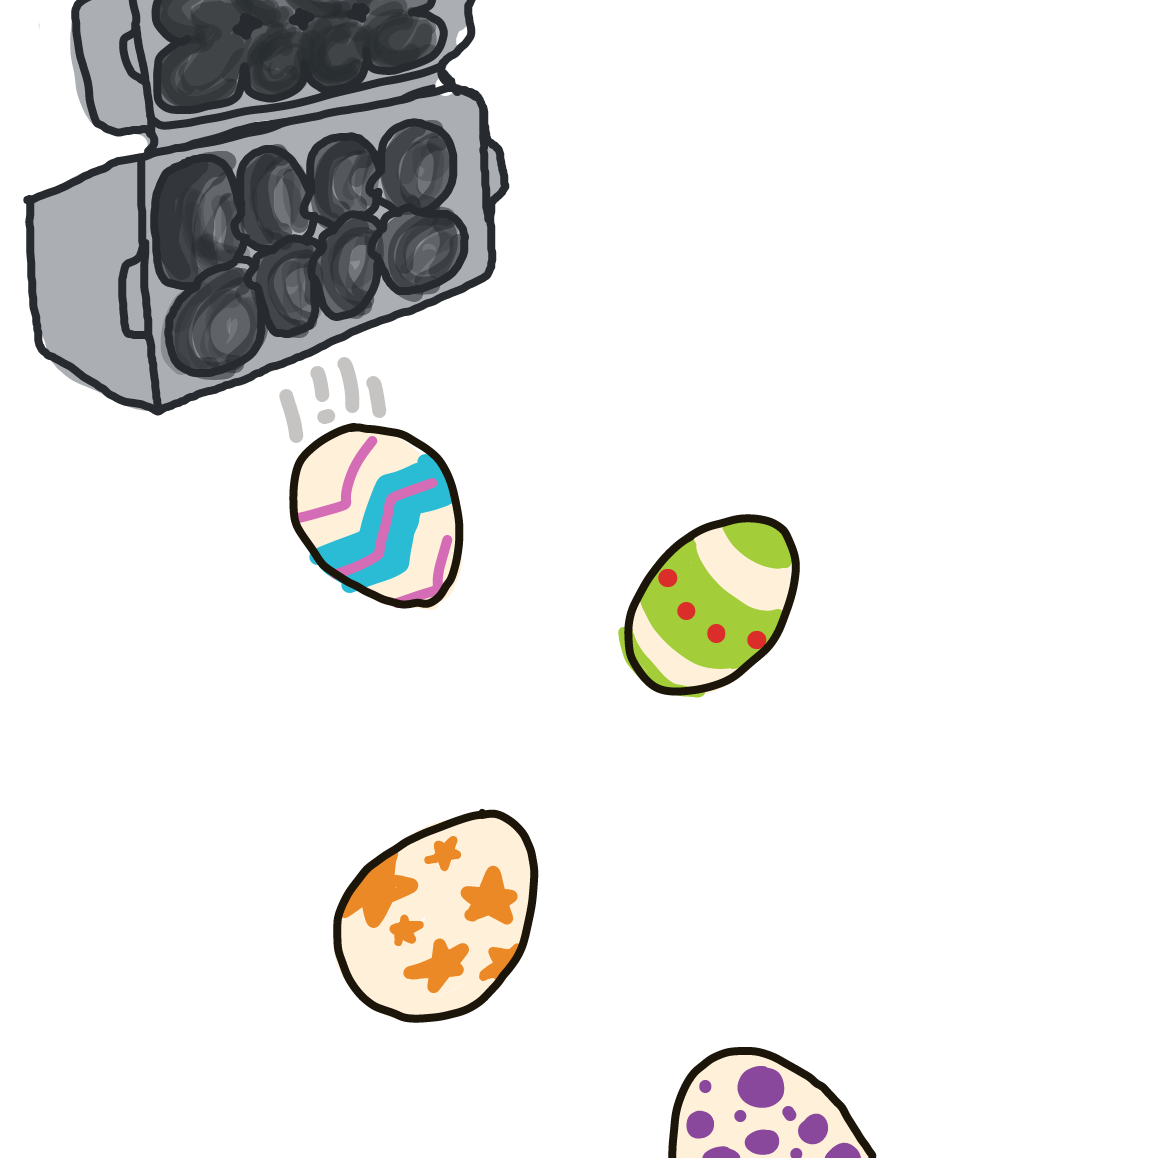 Drawing in Continue the eggs! by Plutomics